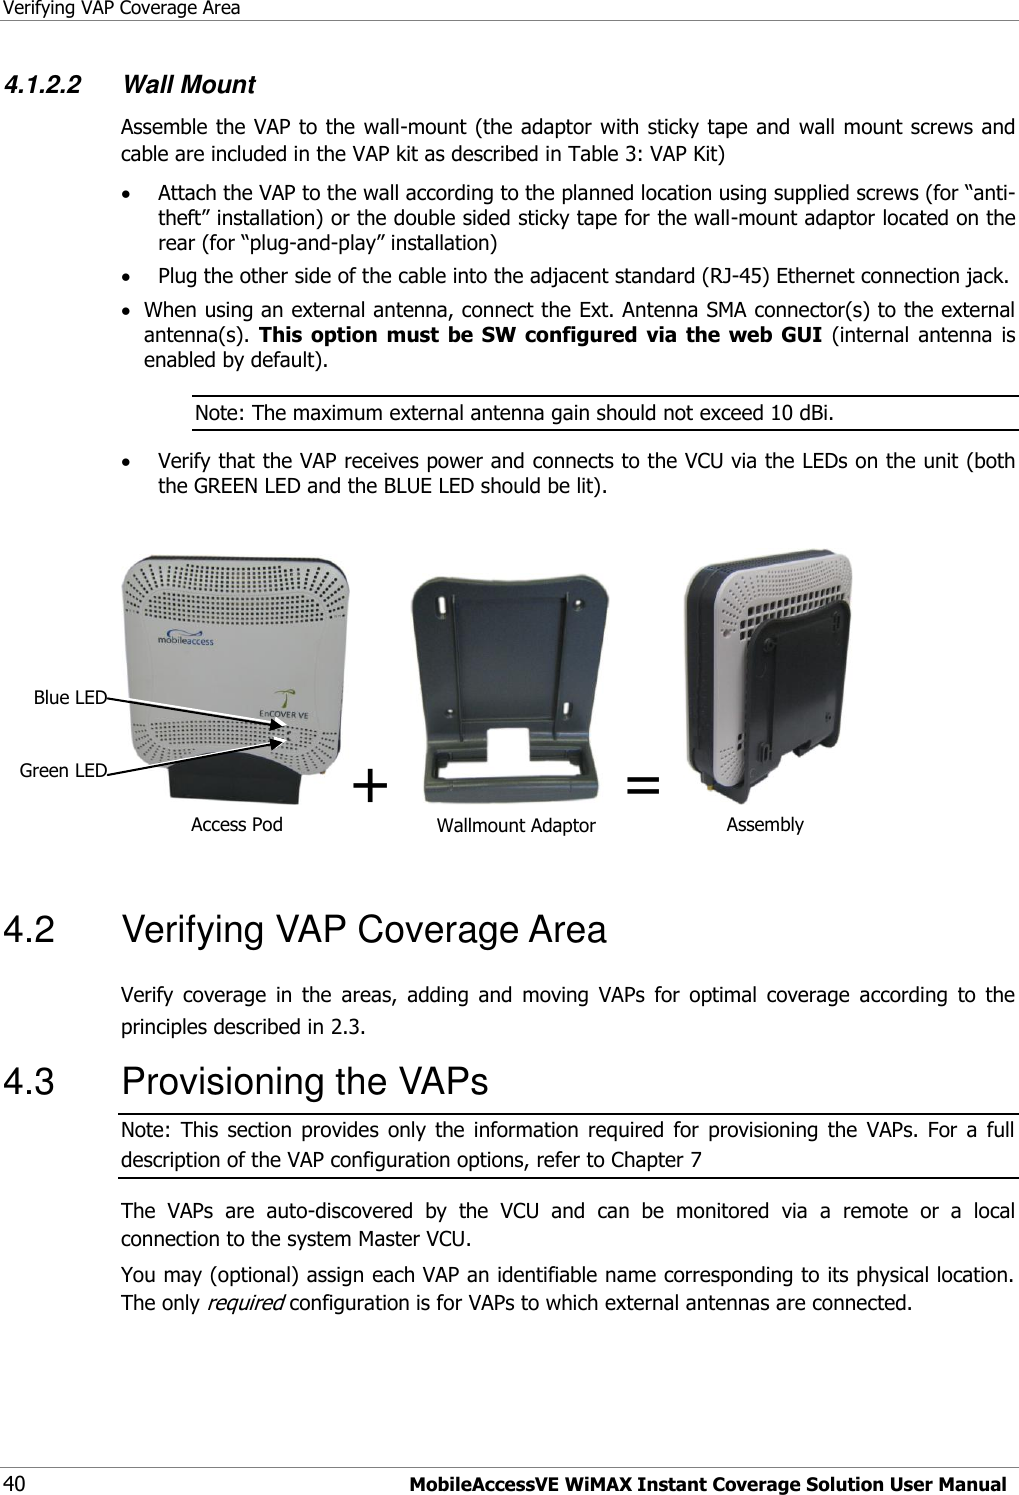 Verifying VAP Coverage Area 40 MobileAccessVE WiMAX Instant Coverage Solution User Manual 4.1.2.2 Wall Mount Assemble the VAP to the wall-mount (the adaptor with sticky tape and wall mount screws and cable are included in the VAP kit as described in Table 3: VAP Kit)  Attach the VAP to the wall according to the planned location using supplied screws (for “anti-theft” installation) or the double sided sticky tape for the wall-mount adaptor located on the rear (for “plug-and-play” installation)  Plug the other side of the cable into the adjacent standard (RJ-45) Ethernet connection jack.  When using an external antenna, connect the Ext. Antenna SMA connector(s) to the external antenna(s).  This  option  must  be  SW  configured  via  the  web  GUI  (internal  antenna is enabled by default). Note: The maximum external antenna gain should not exceed 10 dBi.  Verify that the VAP receives power and connects to the VCU via the LEDs on the unit (both the GREEN LED and the BLUE LED should be lit).  +    =     4.2  Verifying VAP Coverage Area  Verify  coverage  in  the  areas,  adding  and  moving  VAPs  for  optimal  coverage  according  to  the principles described in 2.3. 4.3  Provisioning the VAPs Note:  This  section  provides  only  the  information  required  for  provisioning  the  VAPs.  For  a  full description of the VAP configuration options, refer to Chapter 7  The  VAPs  are  auto-discovered  by  the  VCU  and  can  be  monitored  via  a  remote  or  a  local connection to the system Master VCU.  You may (optional) assign each VAP an identifiable name corresponding to its physical location. The only required configuration is for VAPs to which external antennas are connected.  Access Pod Wallmount Adaptor Assembly Blue LED Green LED 